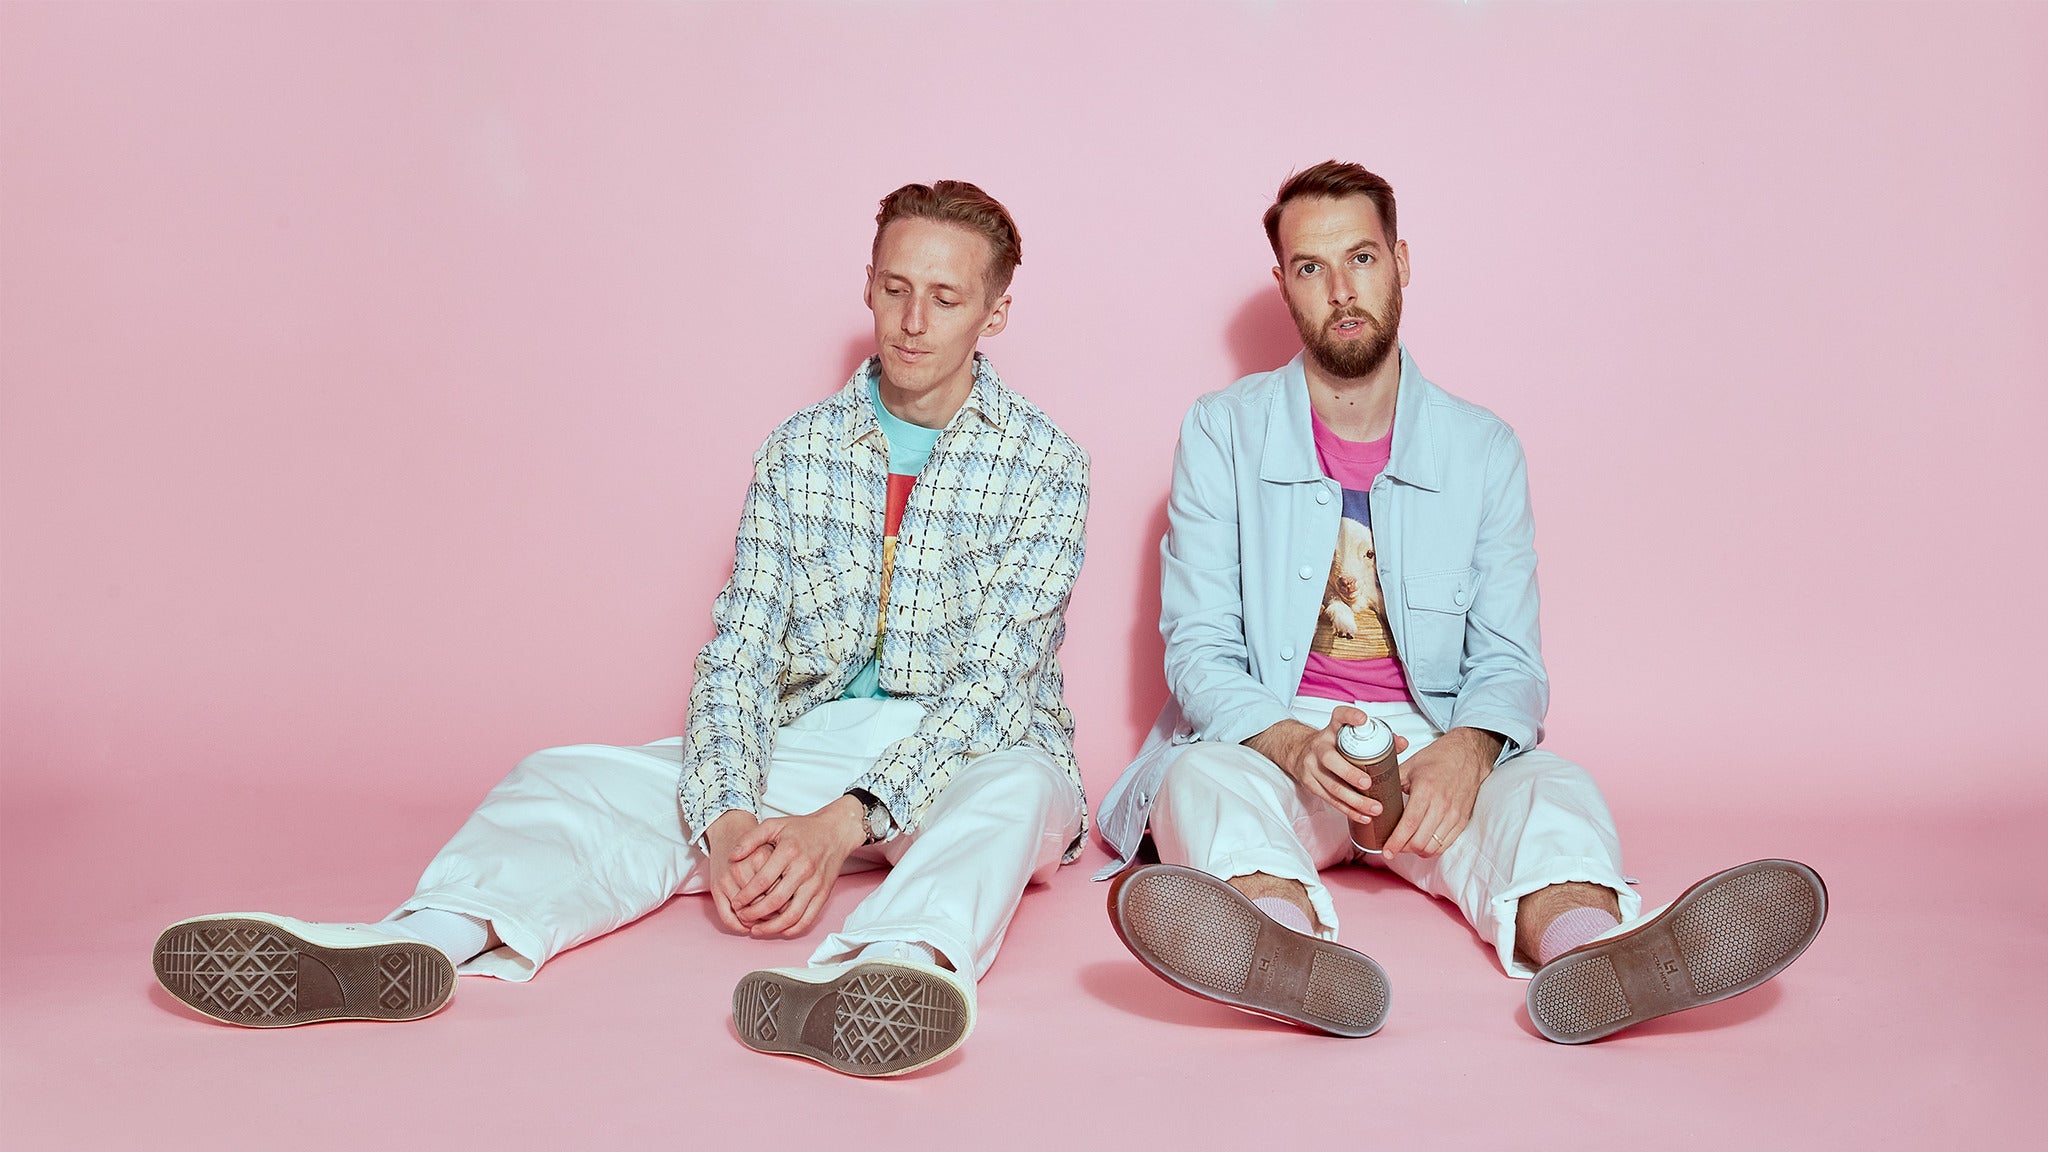 HONNE in Vancouver promo photo for Local presale offer code